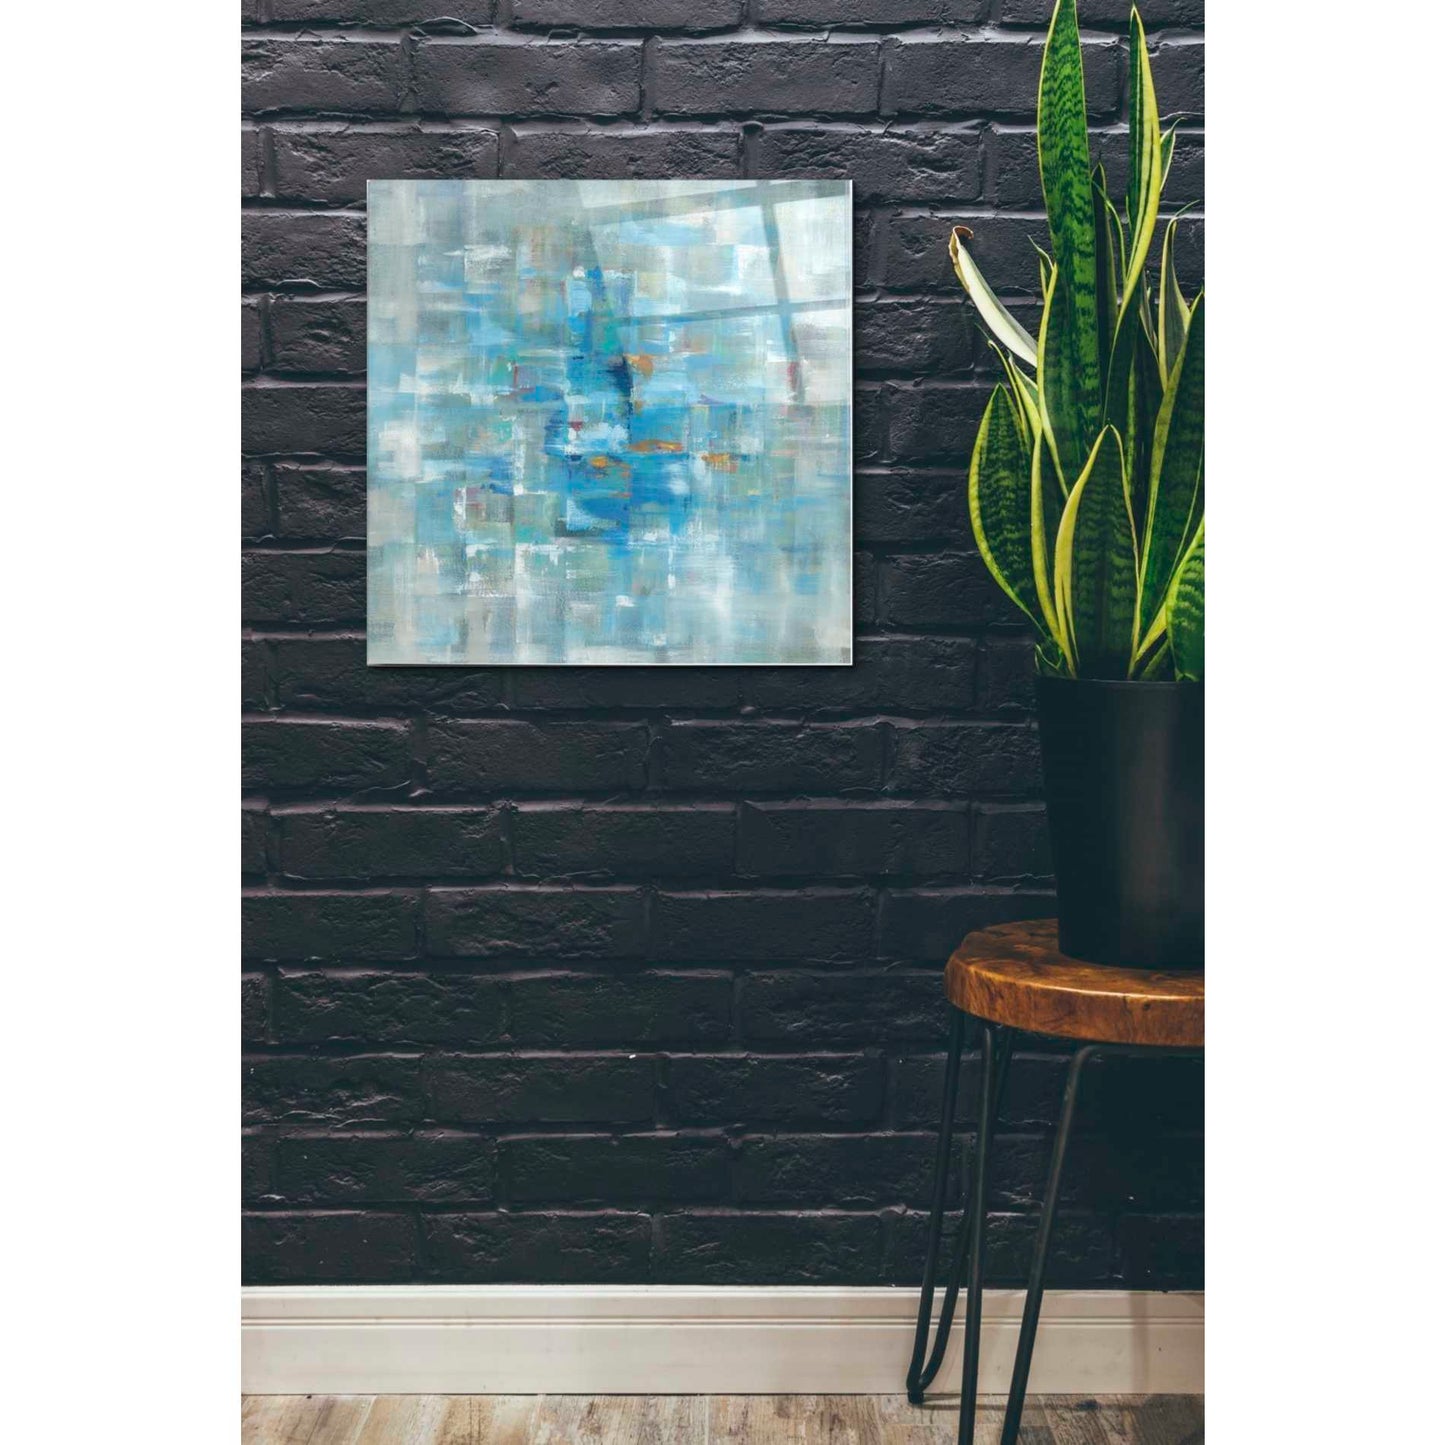 Epic Art 'Abstract Squares' by Danhui Nai, Acrylic Glass Wall Art,24x24